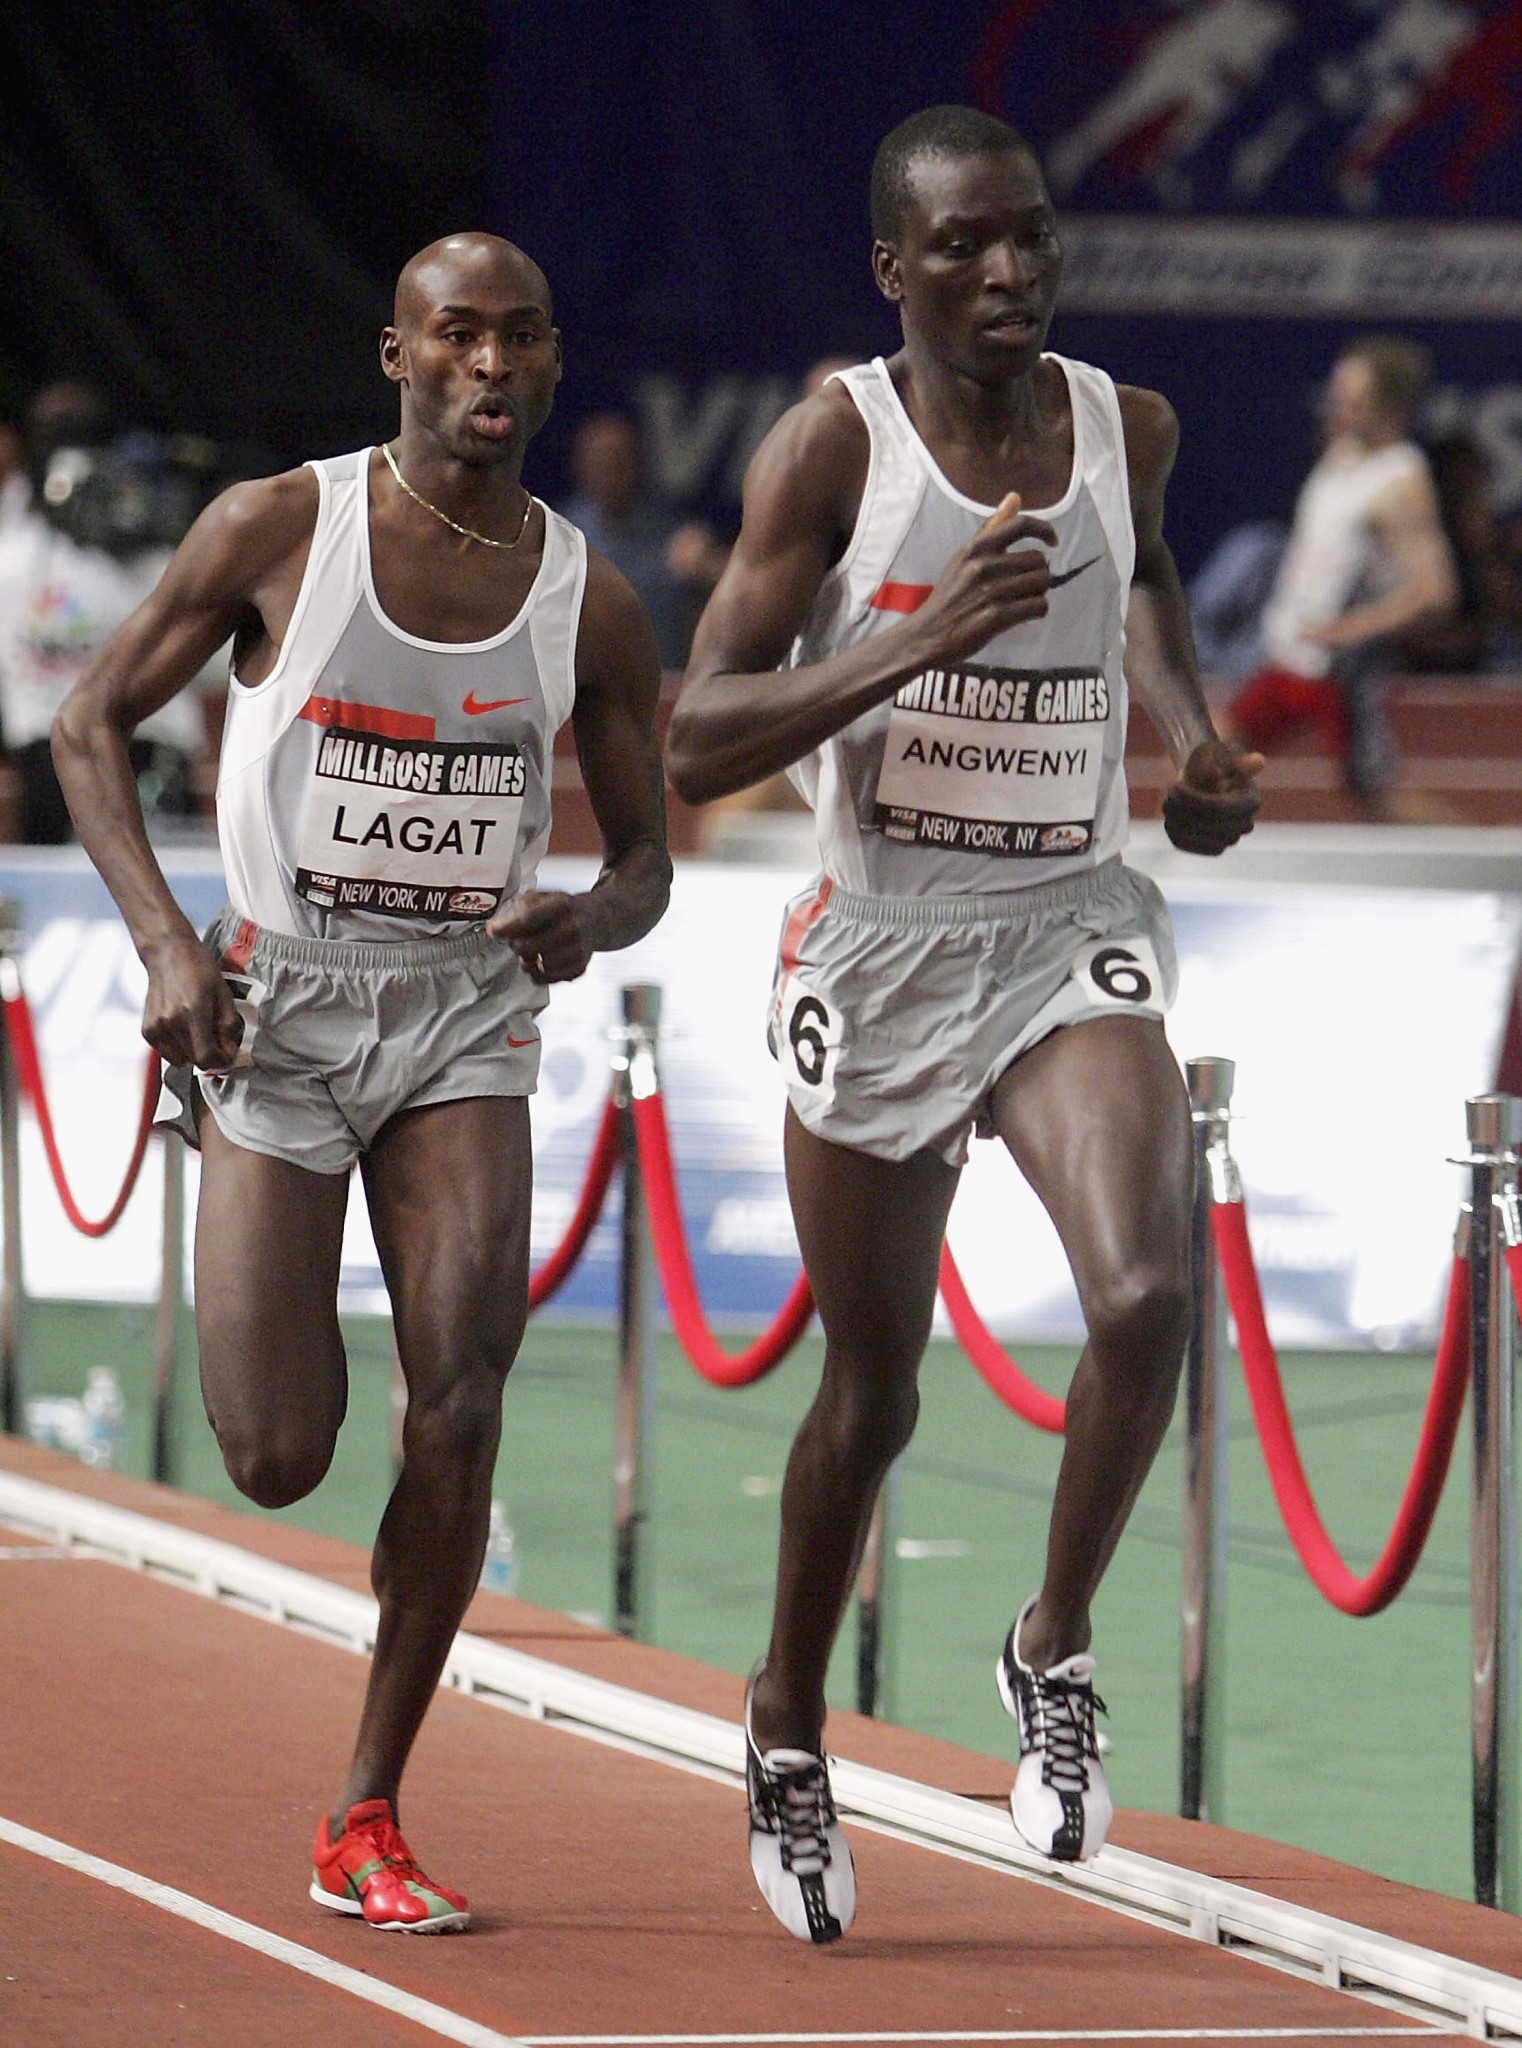 The Wanamaker Mile is an indoor mile race held annually at the Millrose Games ©Getty Images